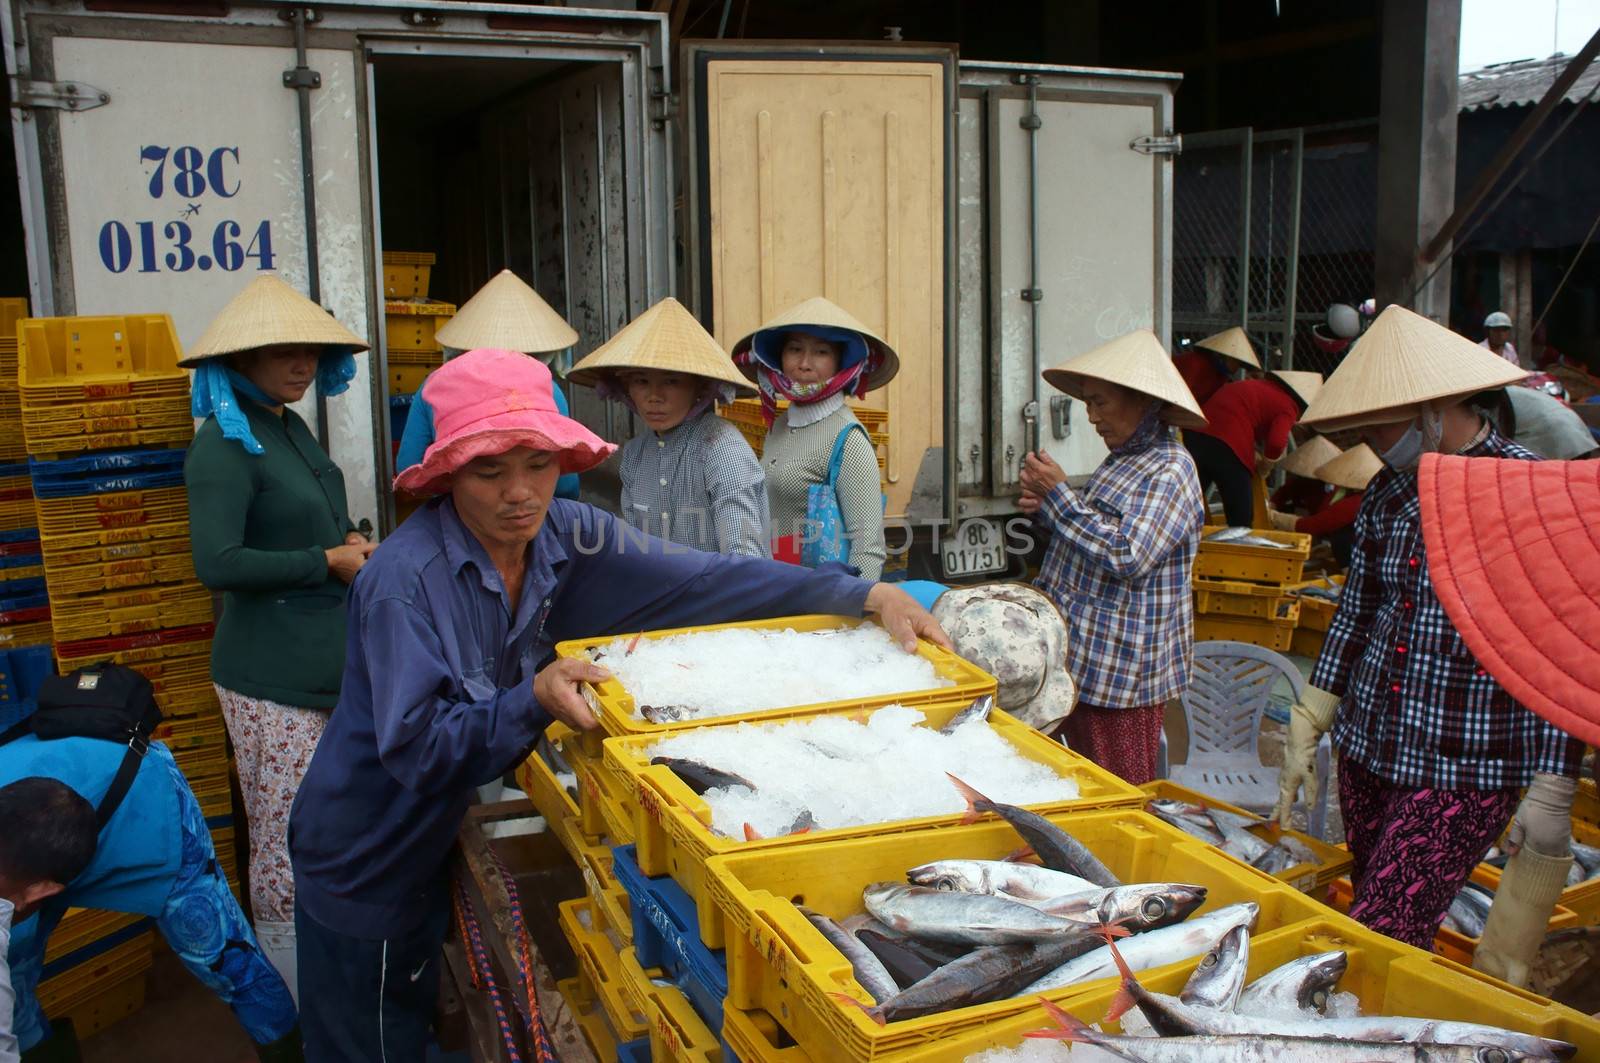 Fish is placed in yellow plastic trays, transported to wholesale at fishing market, man arrange fish plastic tray, women stand surround and look at those. July 15, 2013

